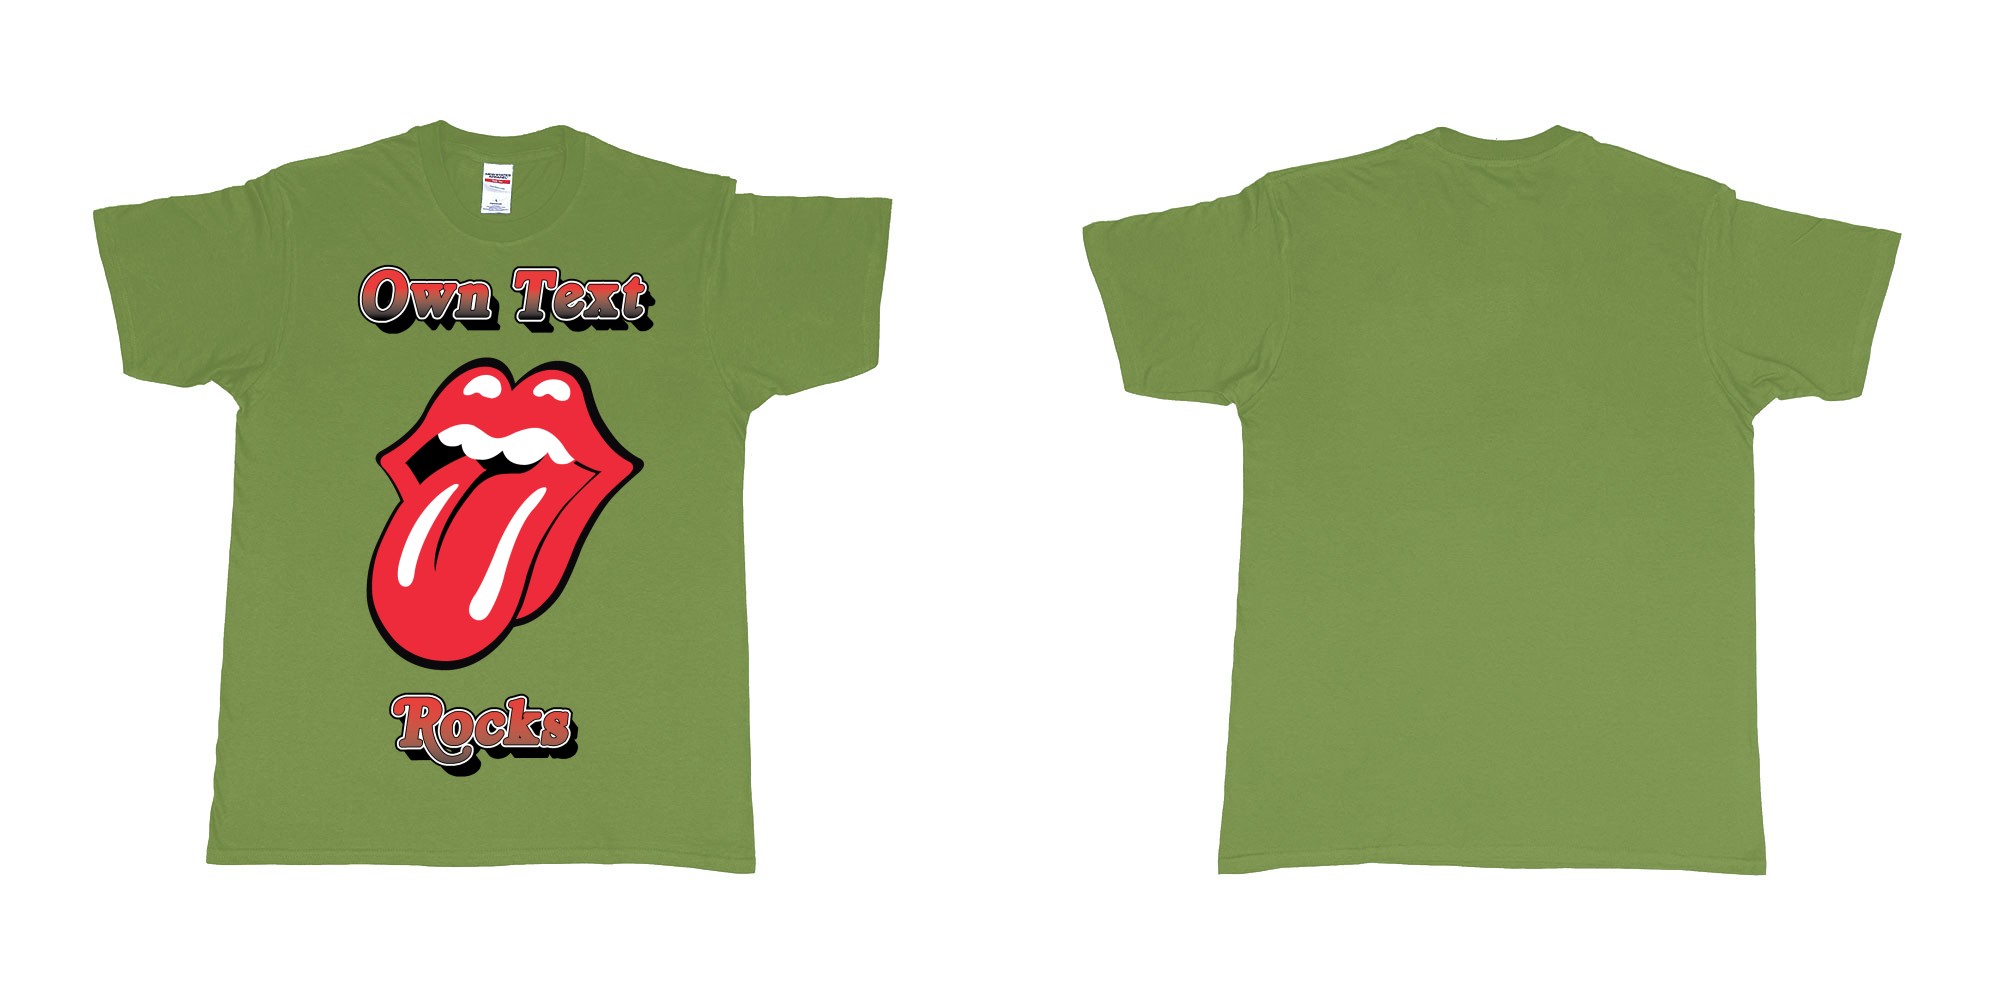 Custom tshirt design own custom text rocks rolling stones logo red tongue and lips print bali in fabric color military-green choice your own text made in Bali by The Pirate Way